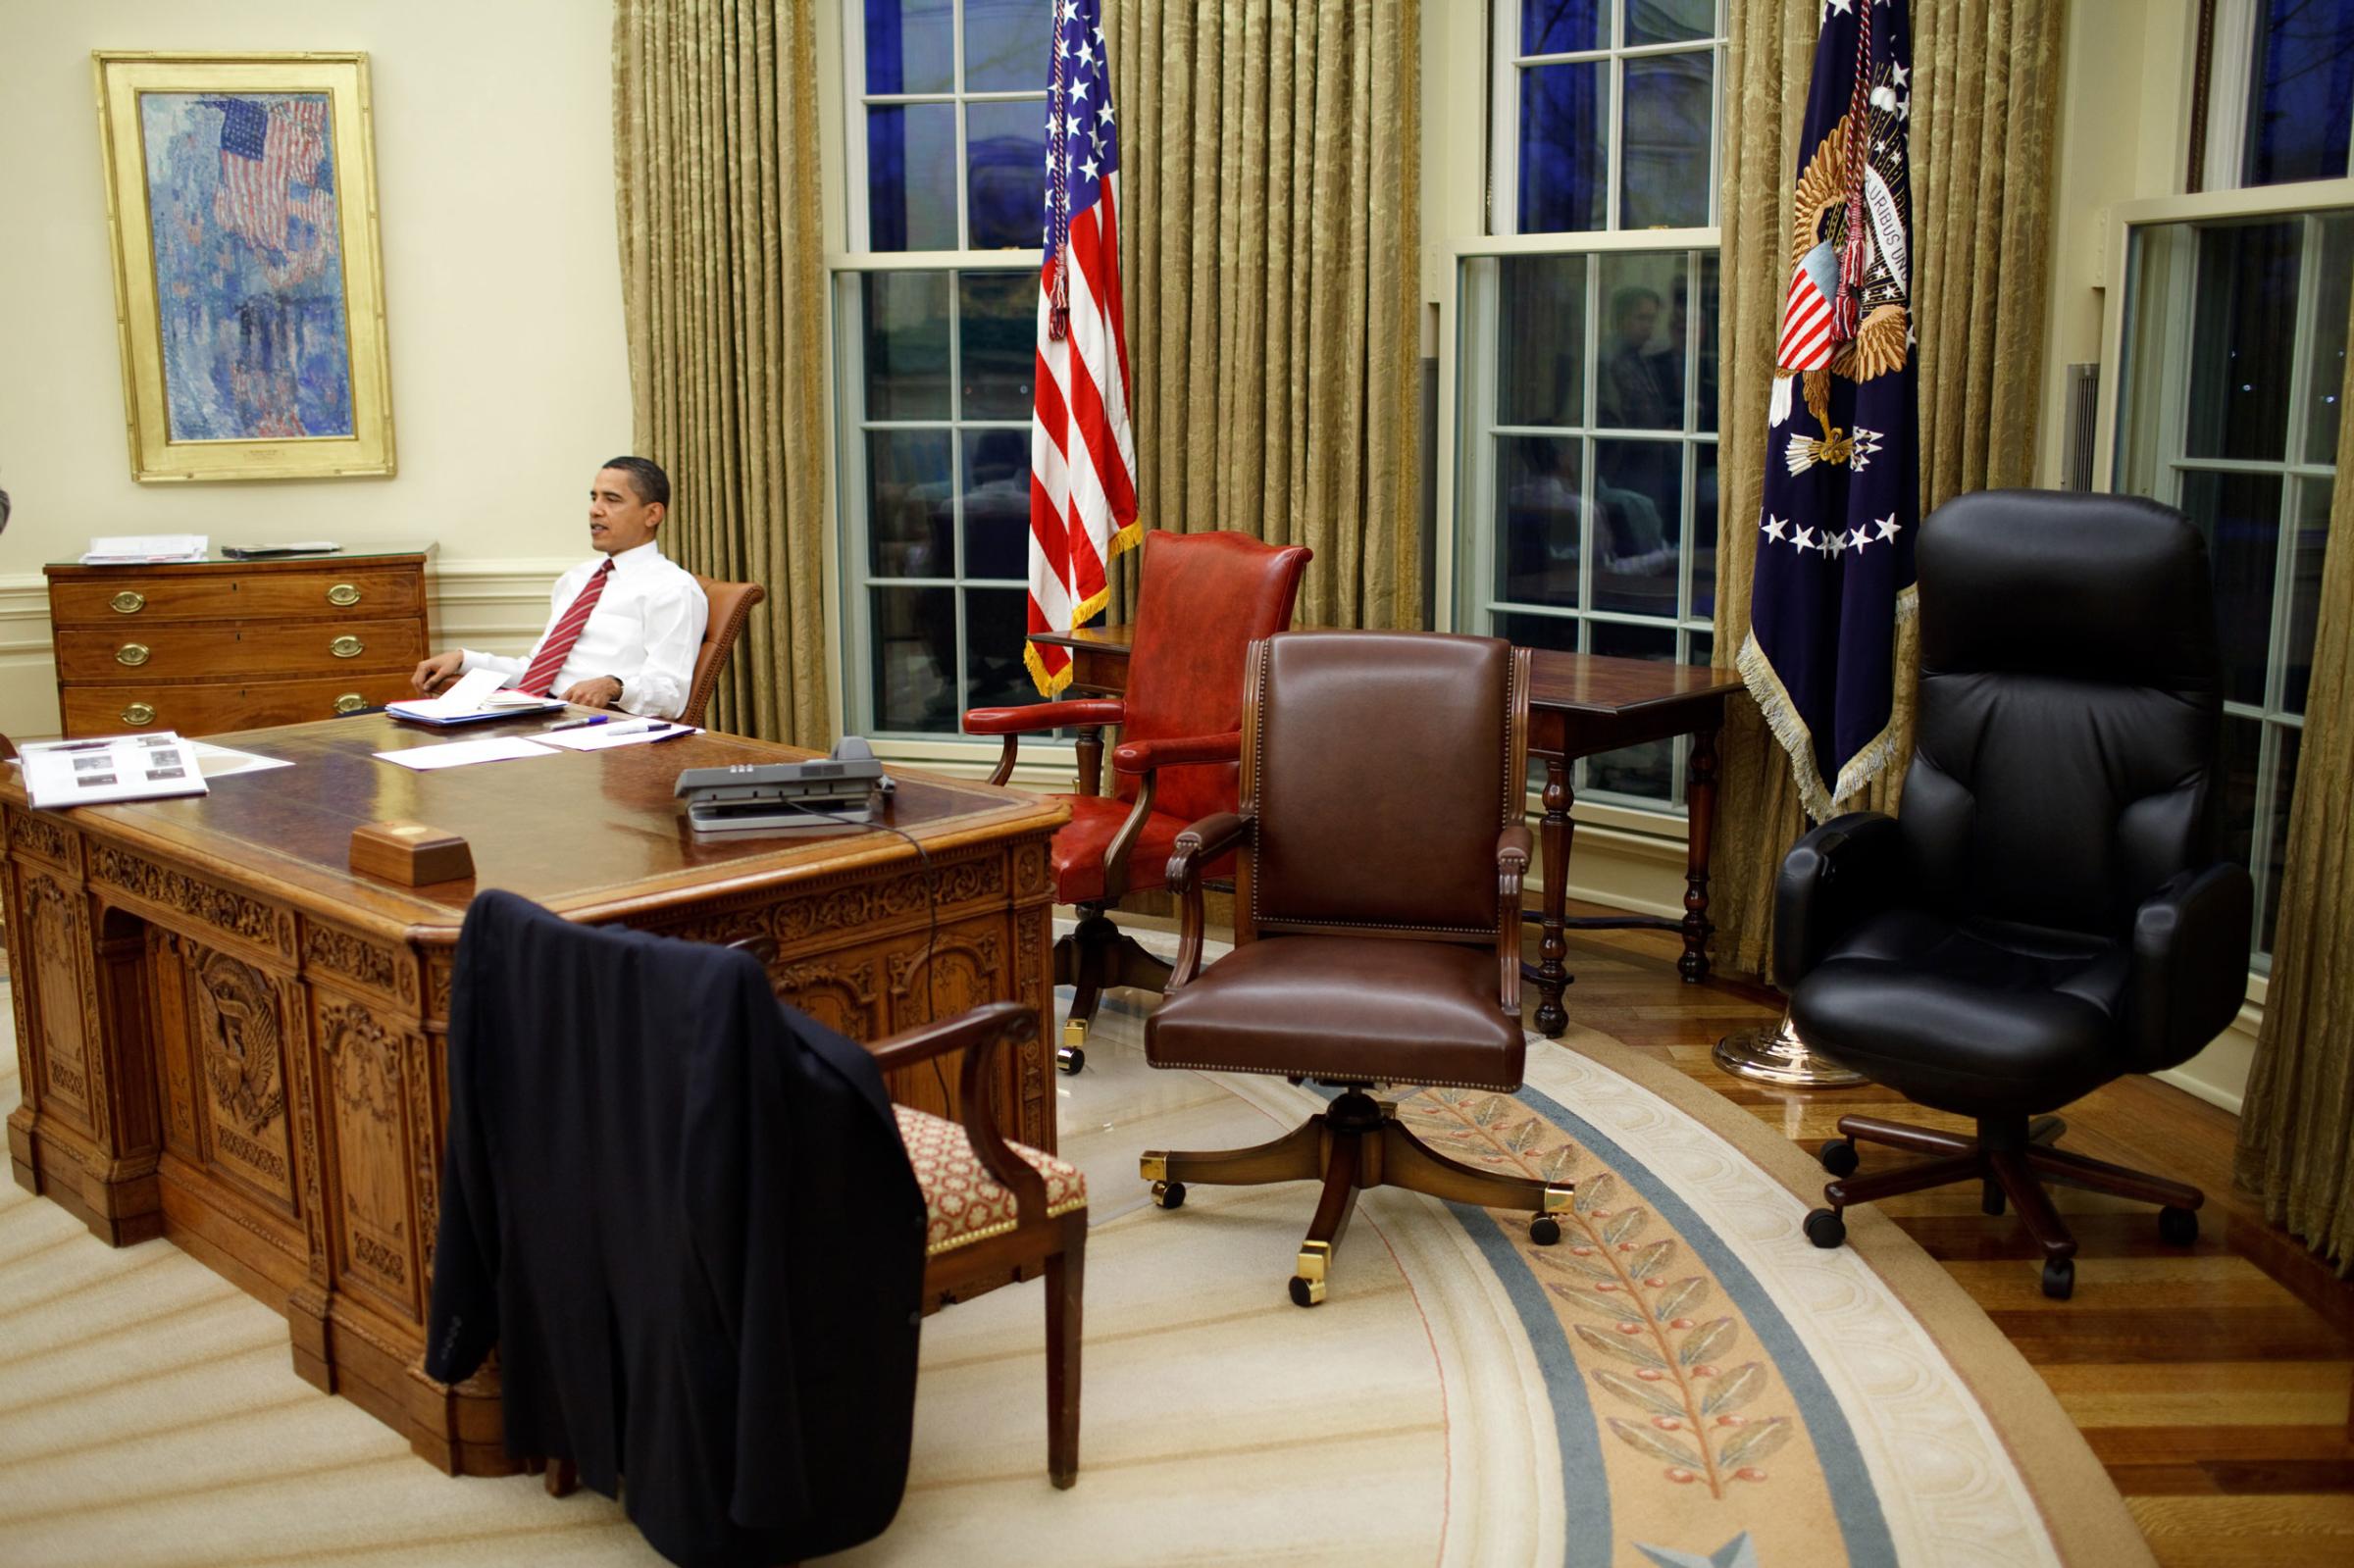 President Barack Obama tries out different desk chairs in the Oval Office, Jan. 30, 2009.